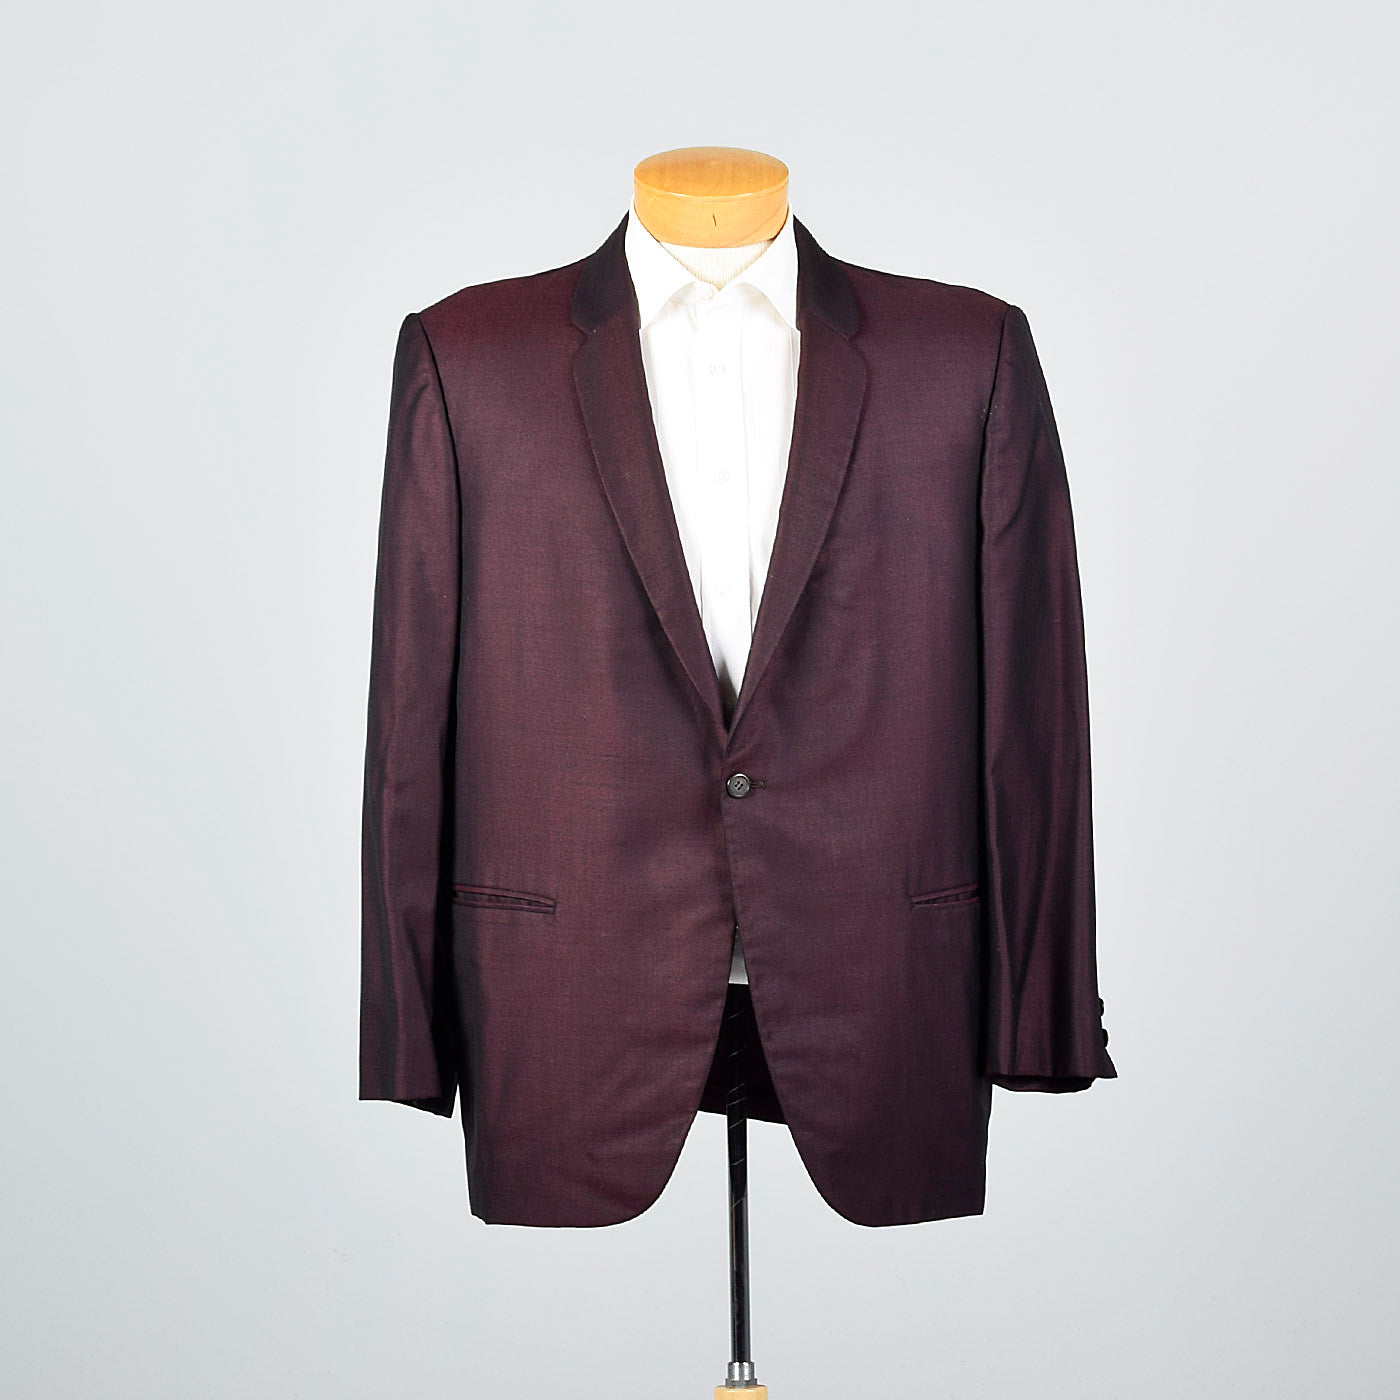 1950s Red and Black Sharkskin Jacket with Rounded Lapels